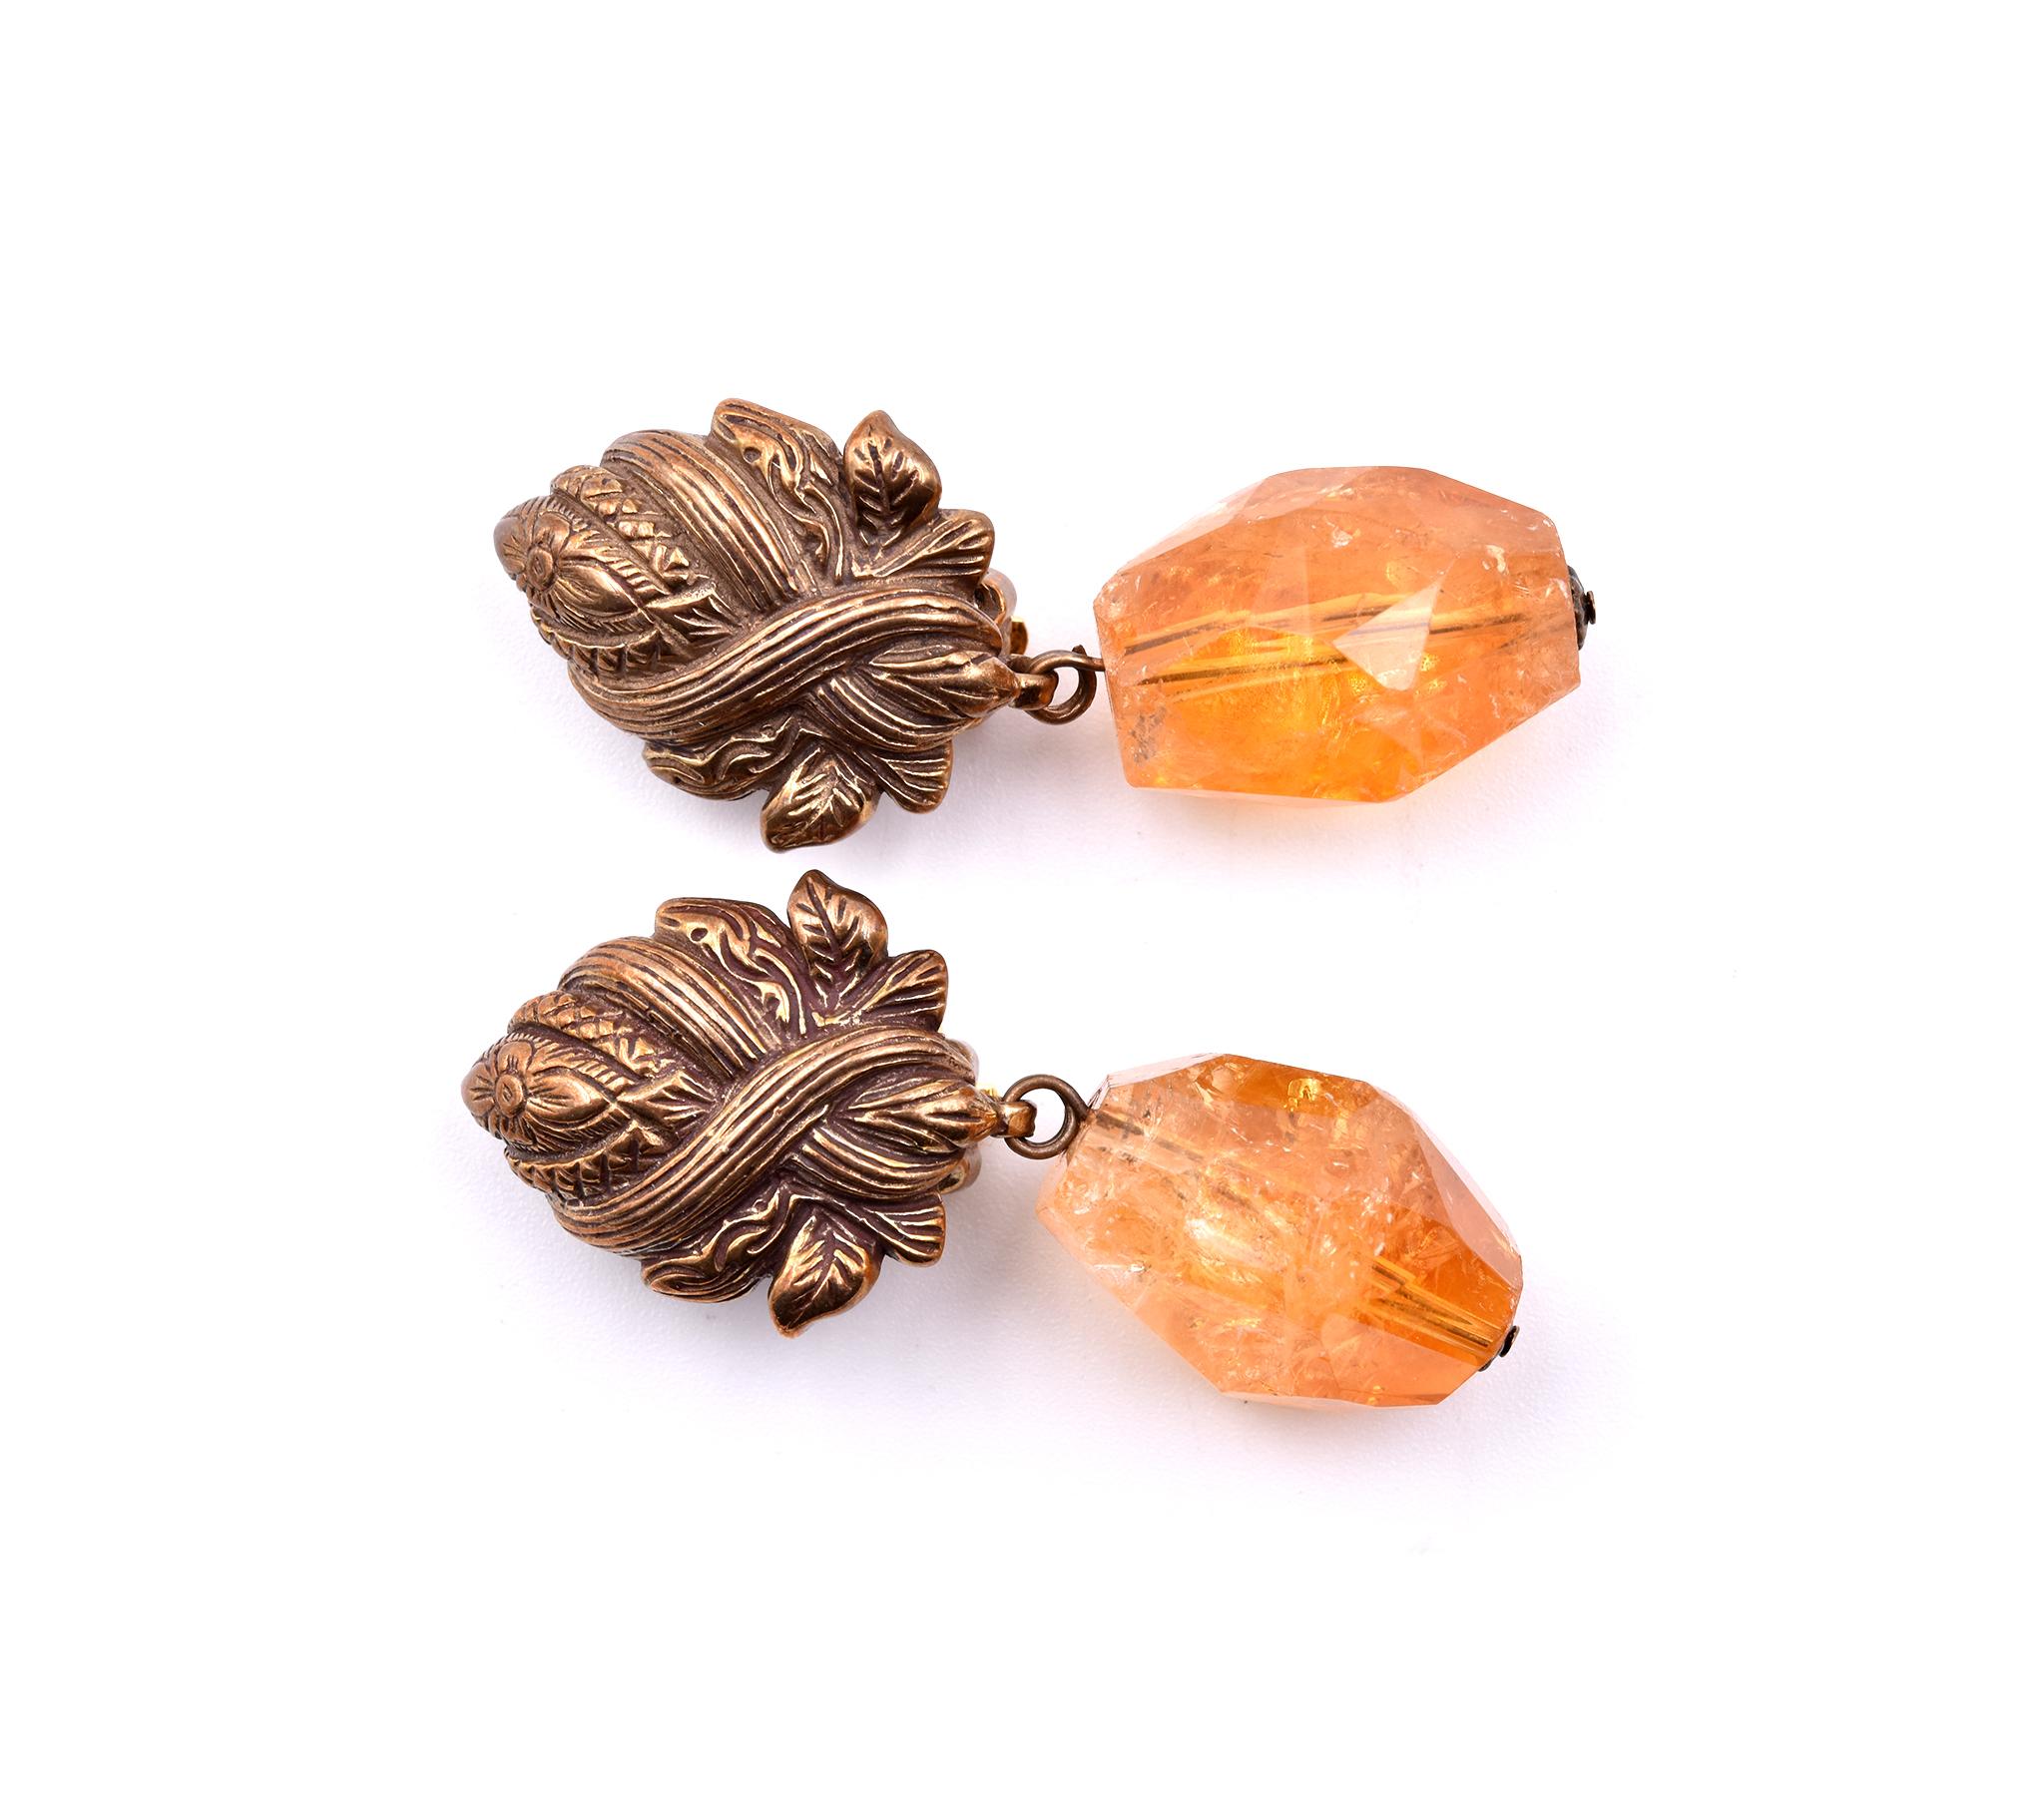 Designer: Stephen Dweck
Material: sterling silver
Gemstone: 2 faceted citrine nuggets
Dimensions: earrings measure 44.15mm x 18.35mm
Fastening: clip on
Weight: 18.22 grams
